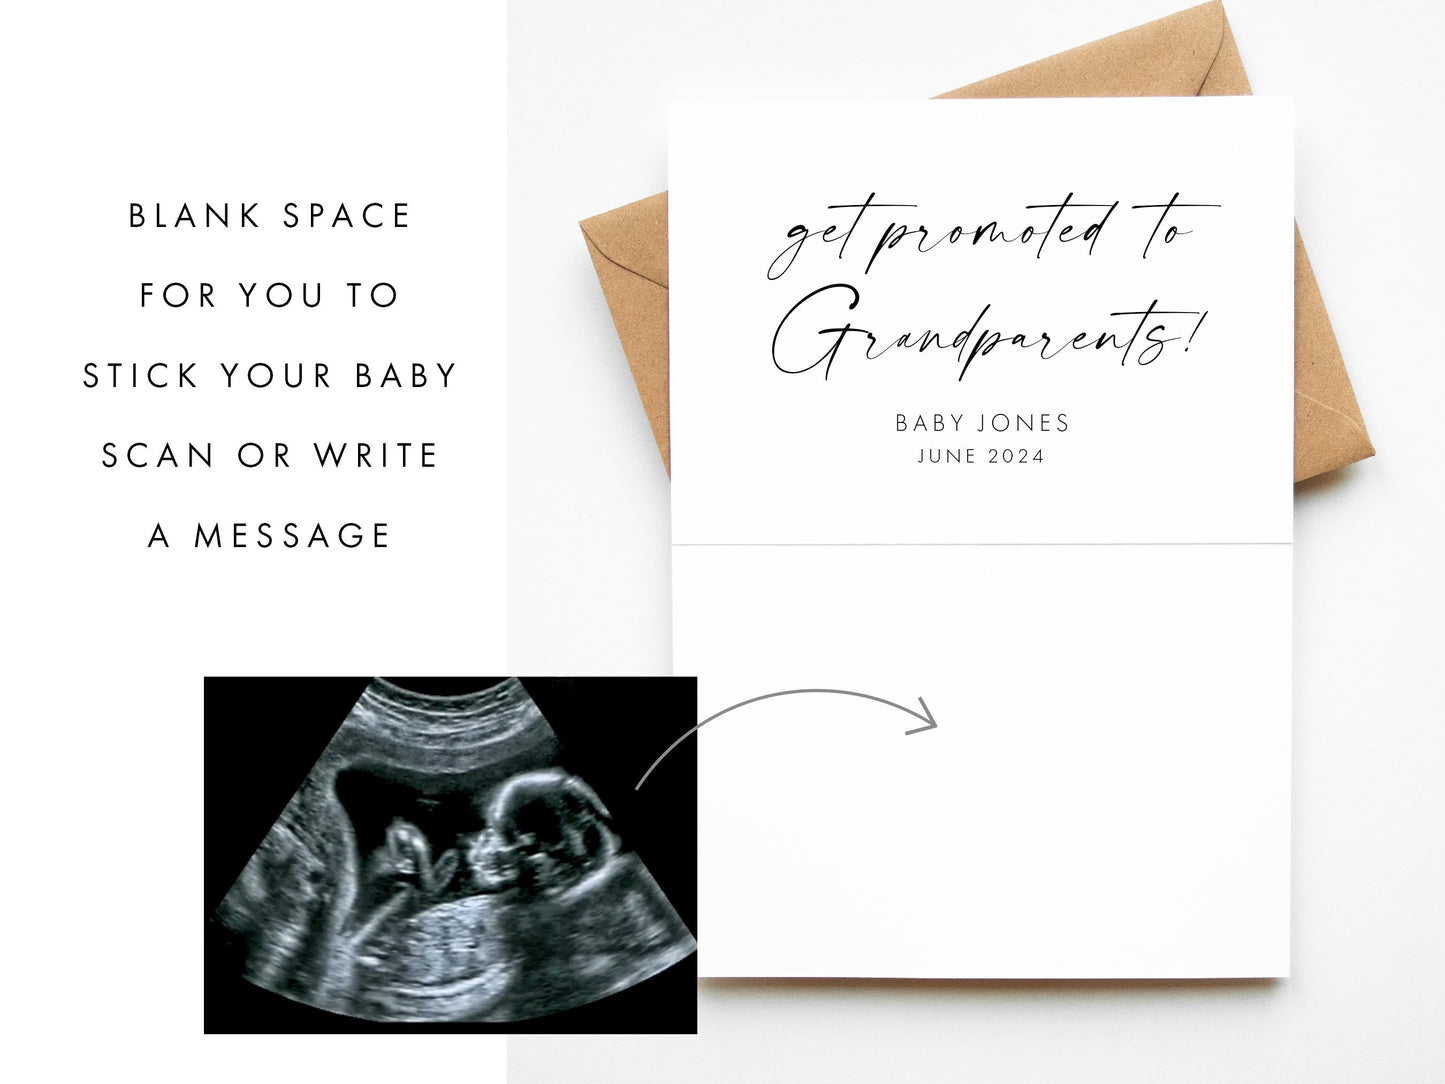 Personalised Pregnancy Announcement Dog Grandparents to Human